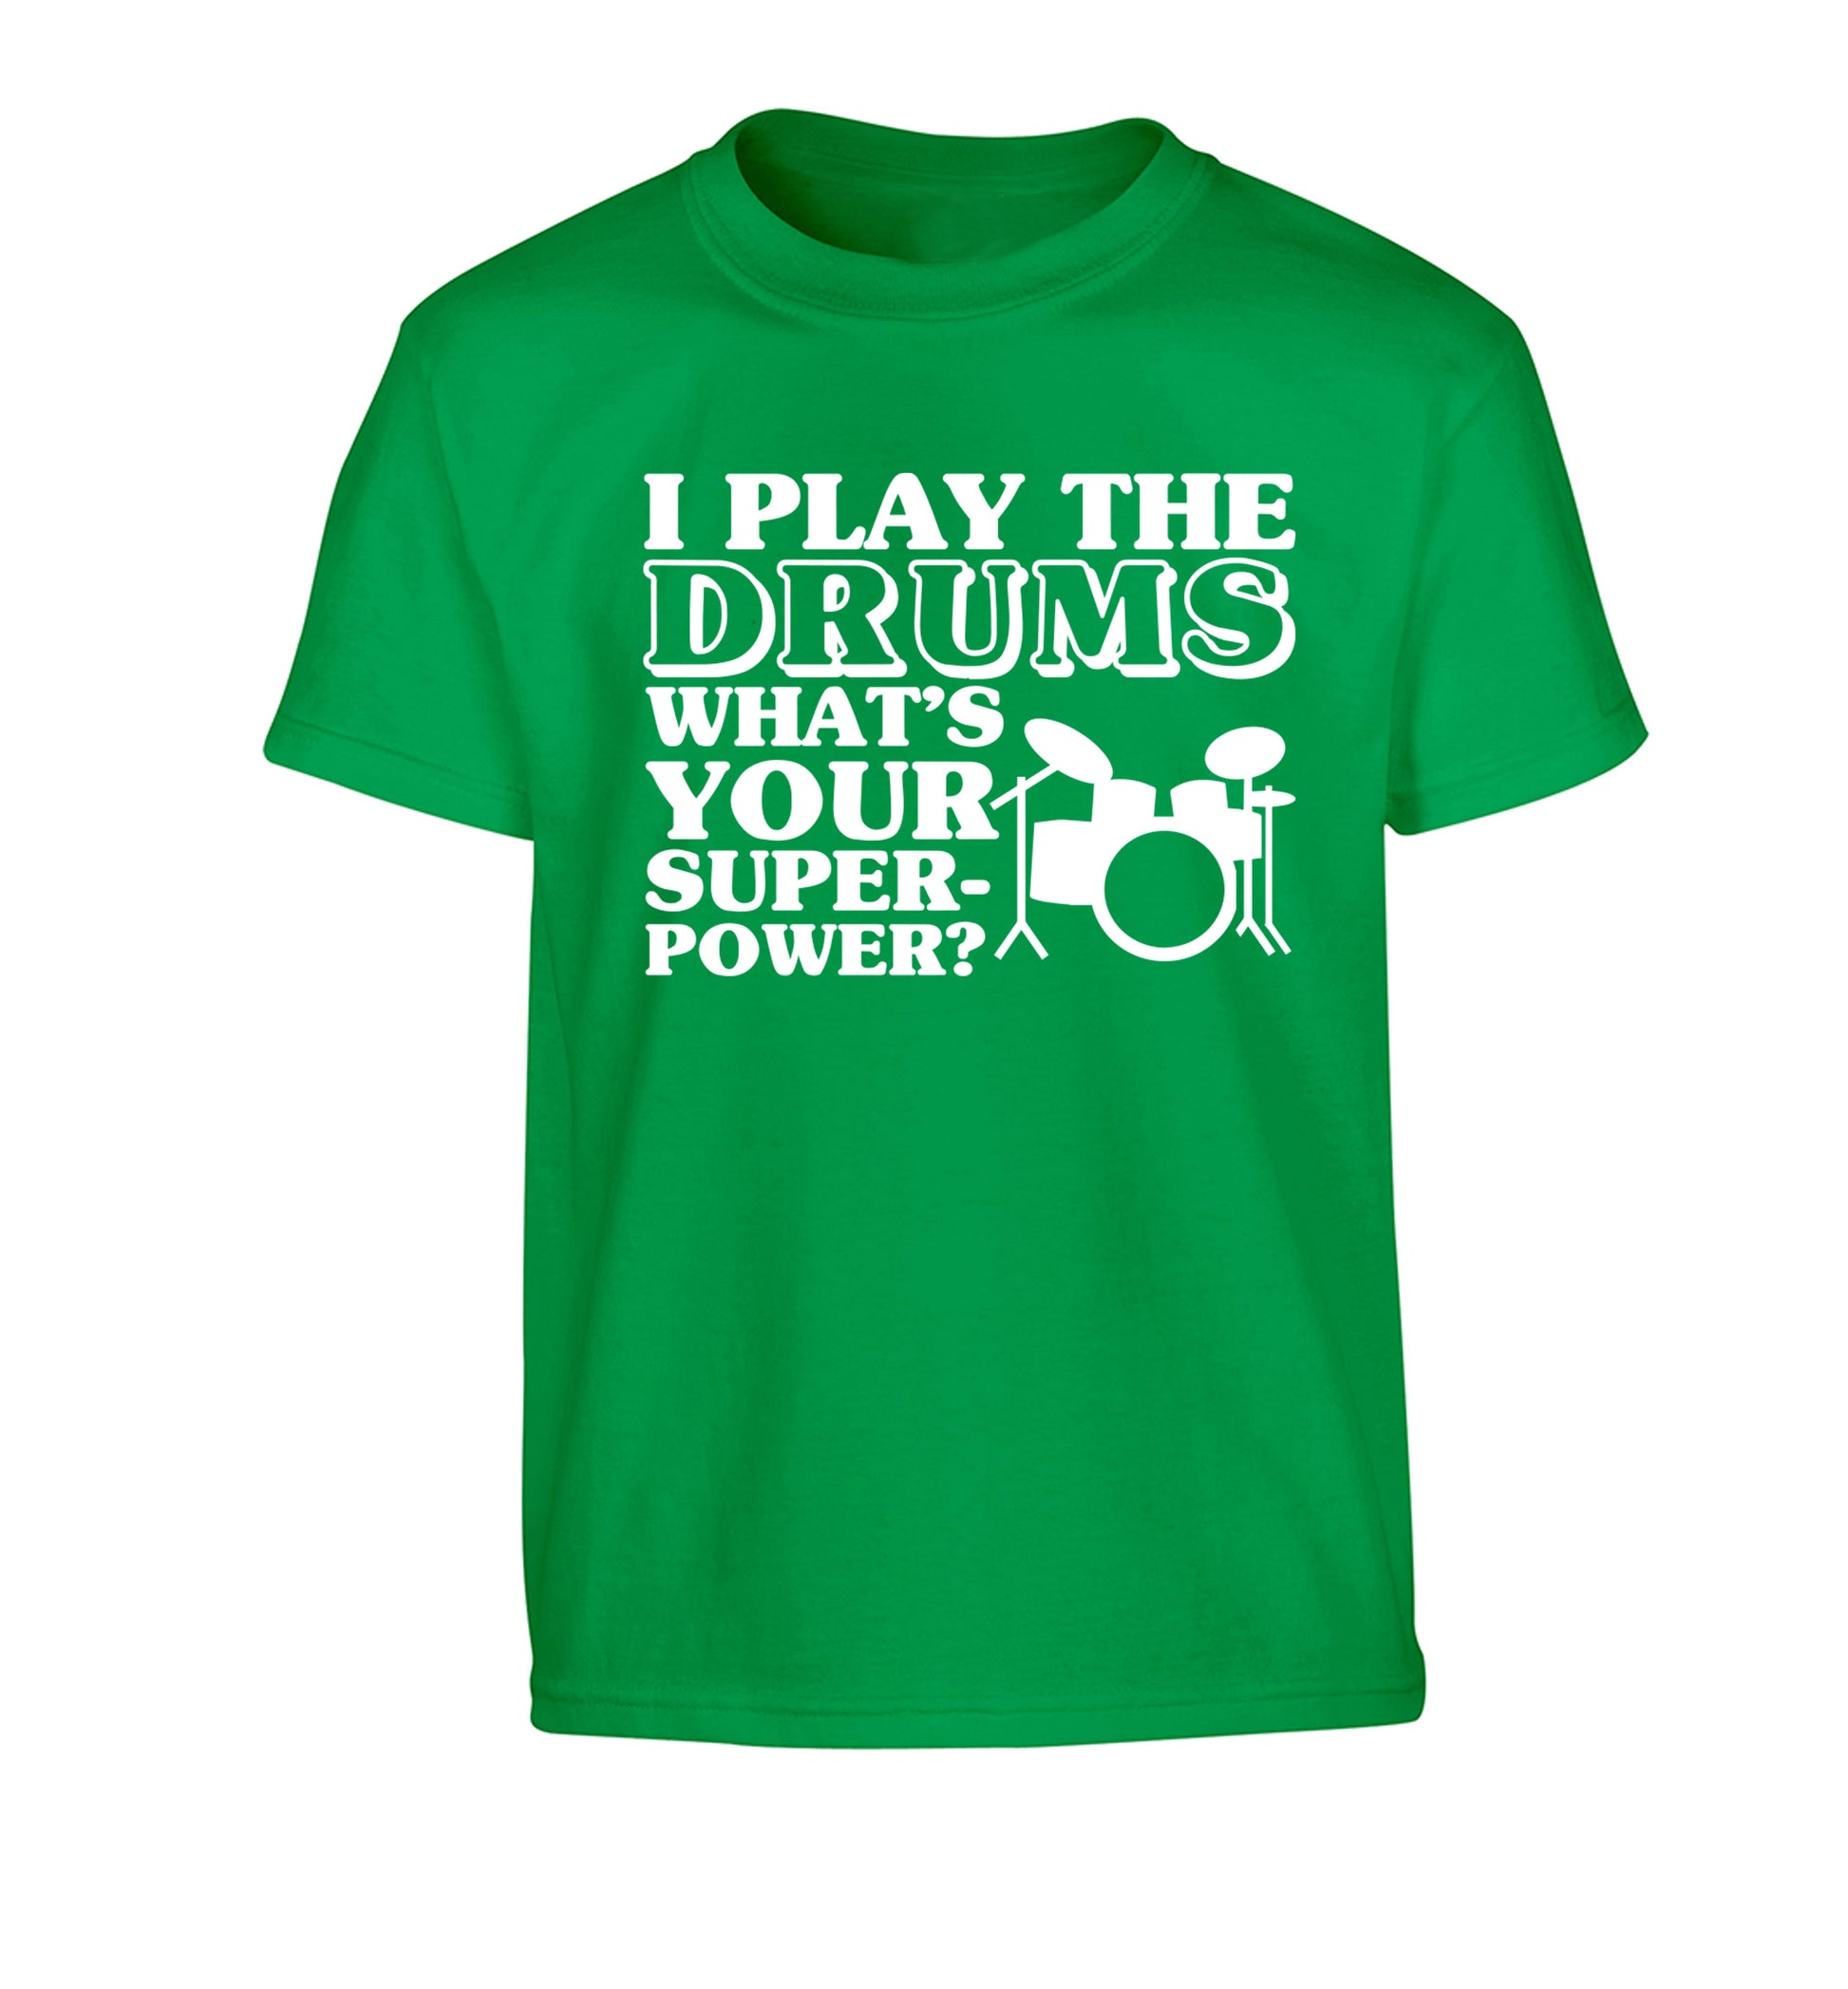 I play the drums what's your superpower? Children's green Tshirt 12-14 Years